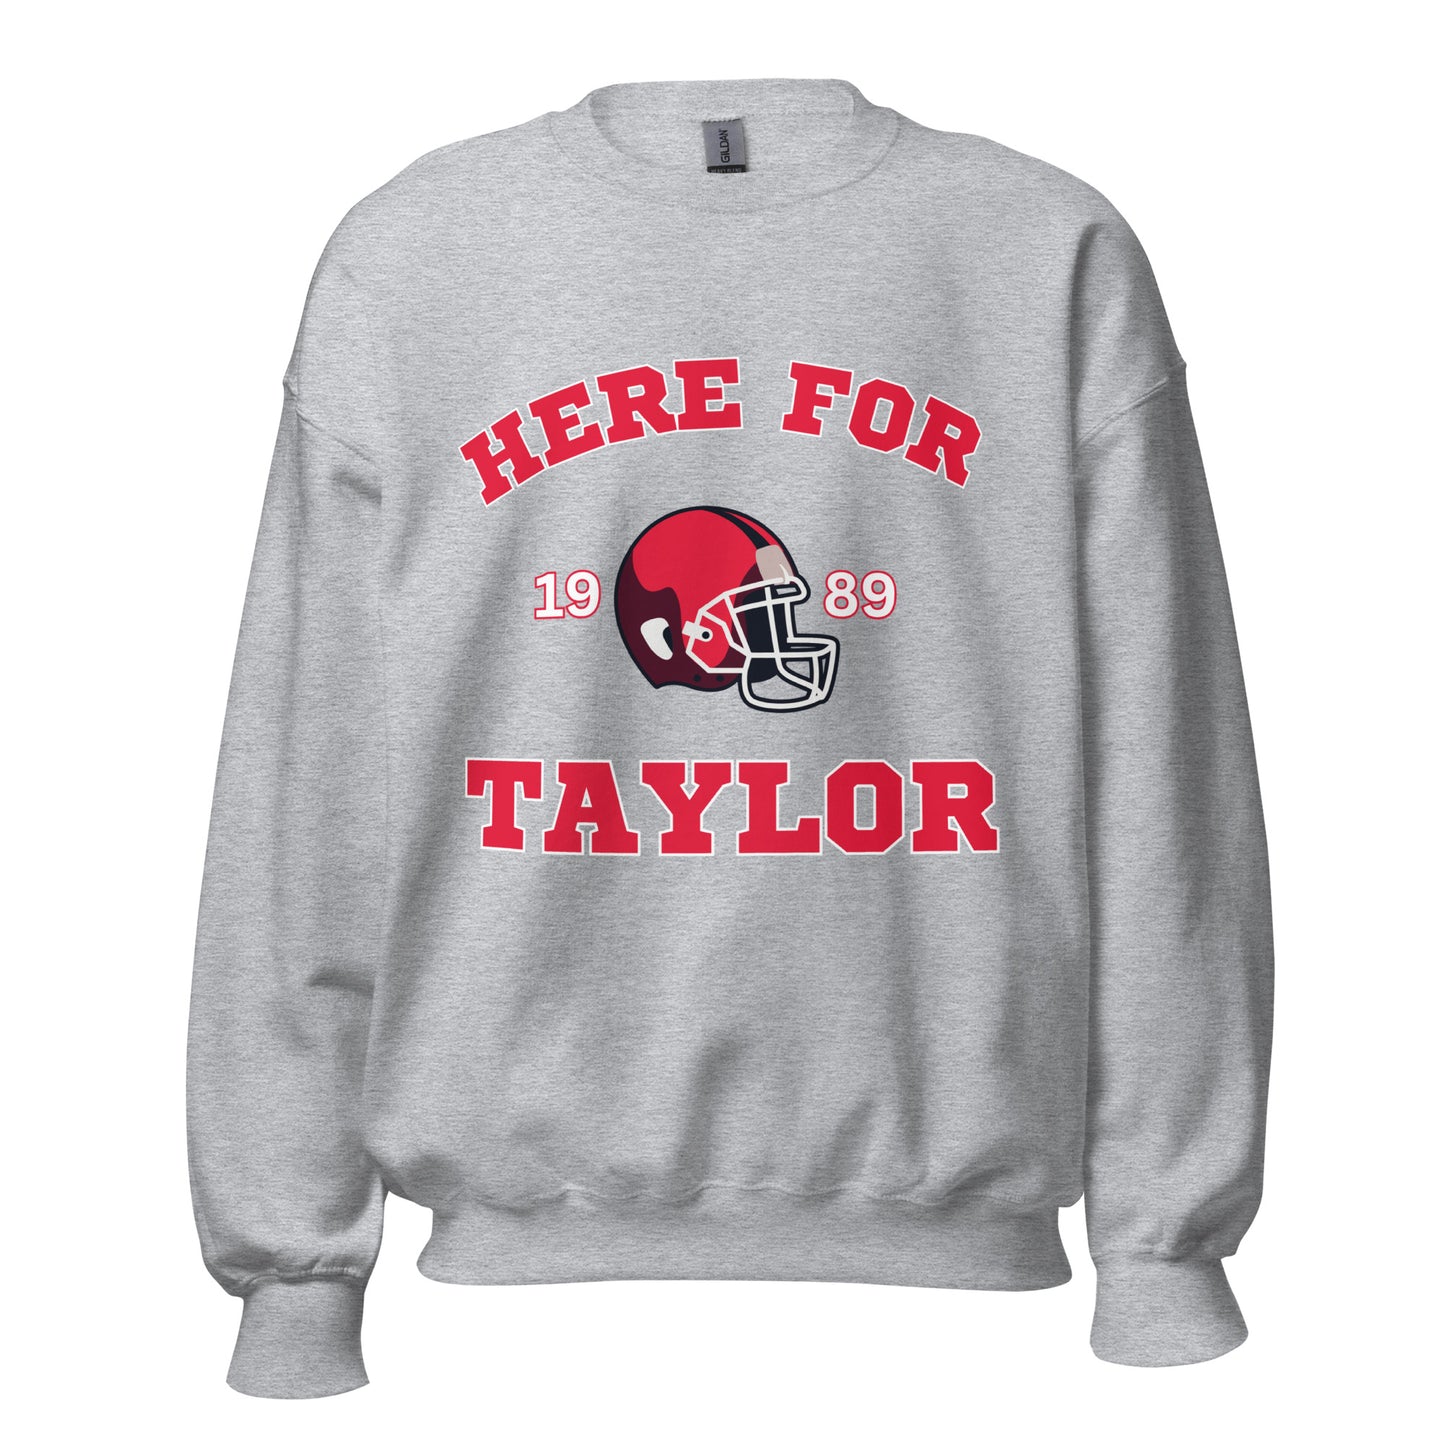 Here For Taylor | Crewneck